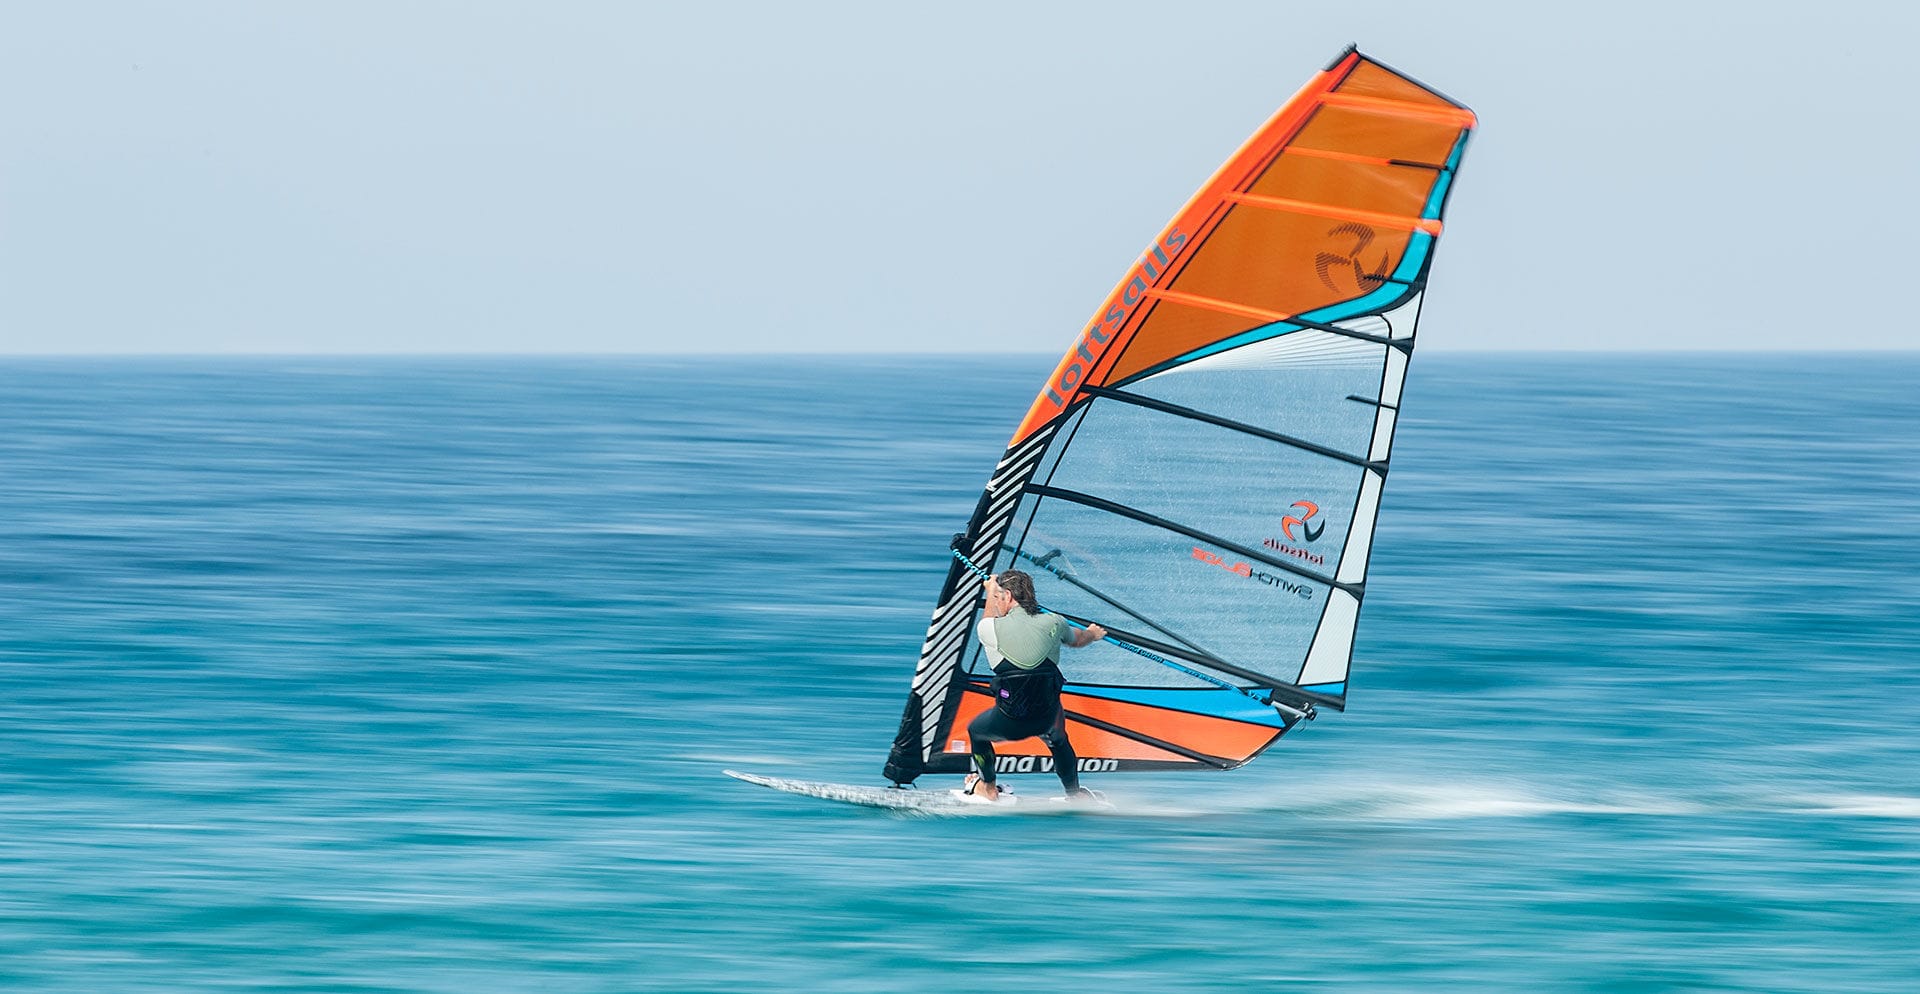 Global Racing Windsurf Sails Market 2020 – Industry Scenario, Strategies, Growth Factors and Forecast 2025 – Owned